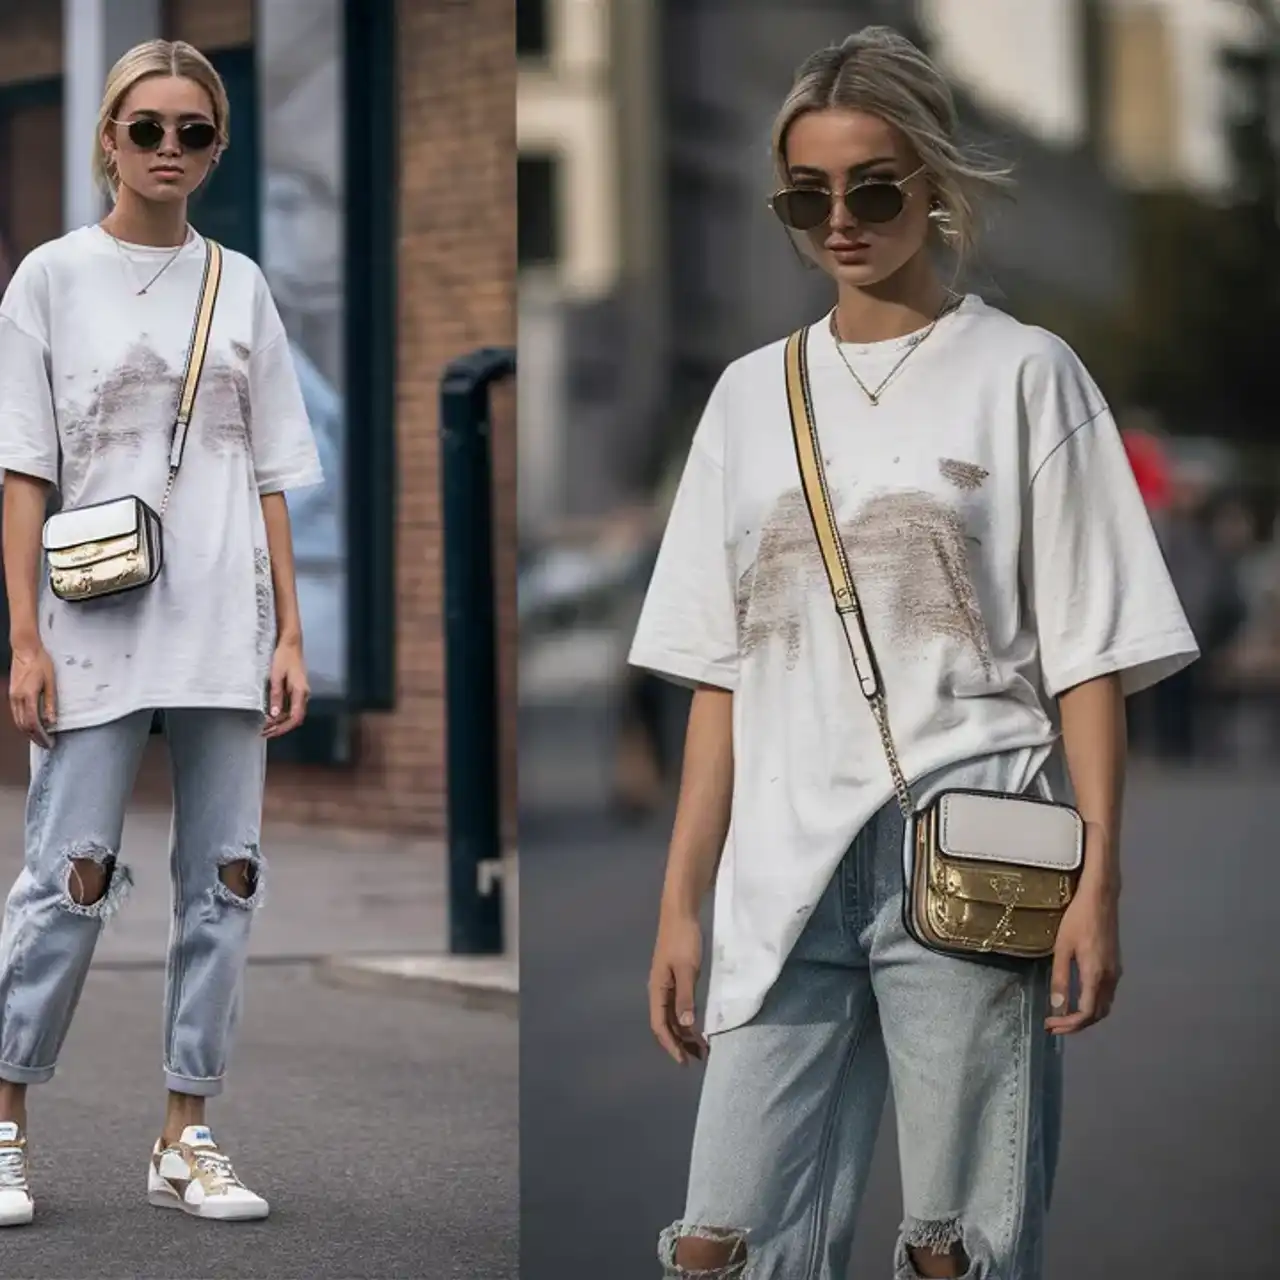 20 Stylish Contemporary Outfit Ideas for Women: From Golden Goose Vibes to Everyday Chic